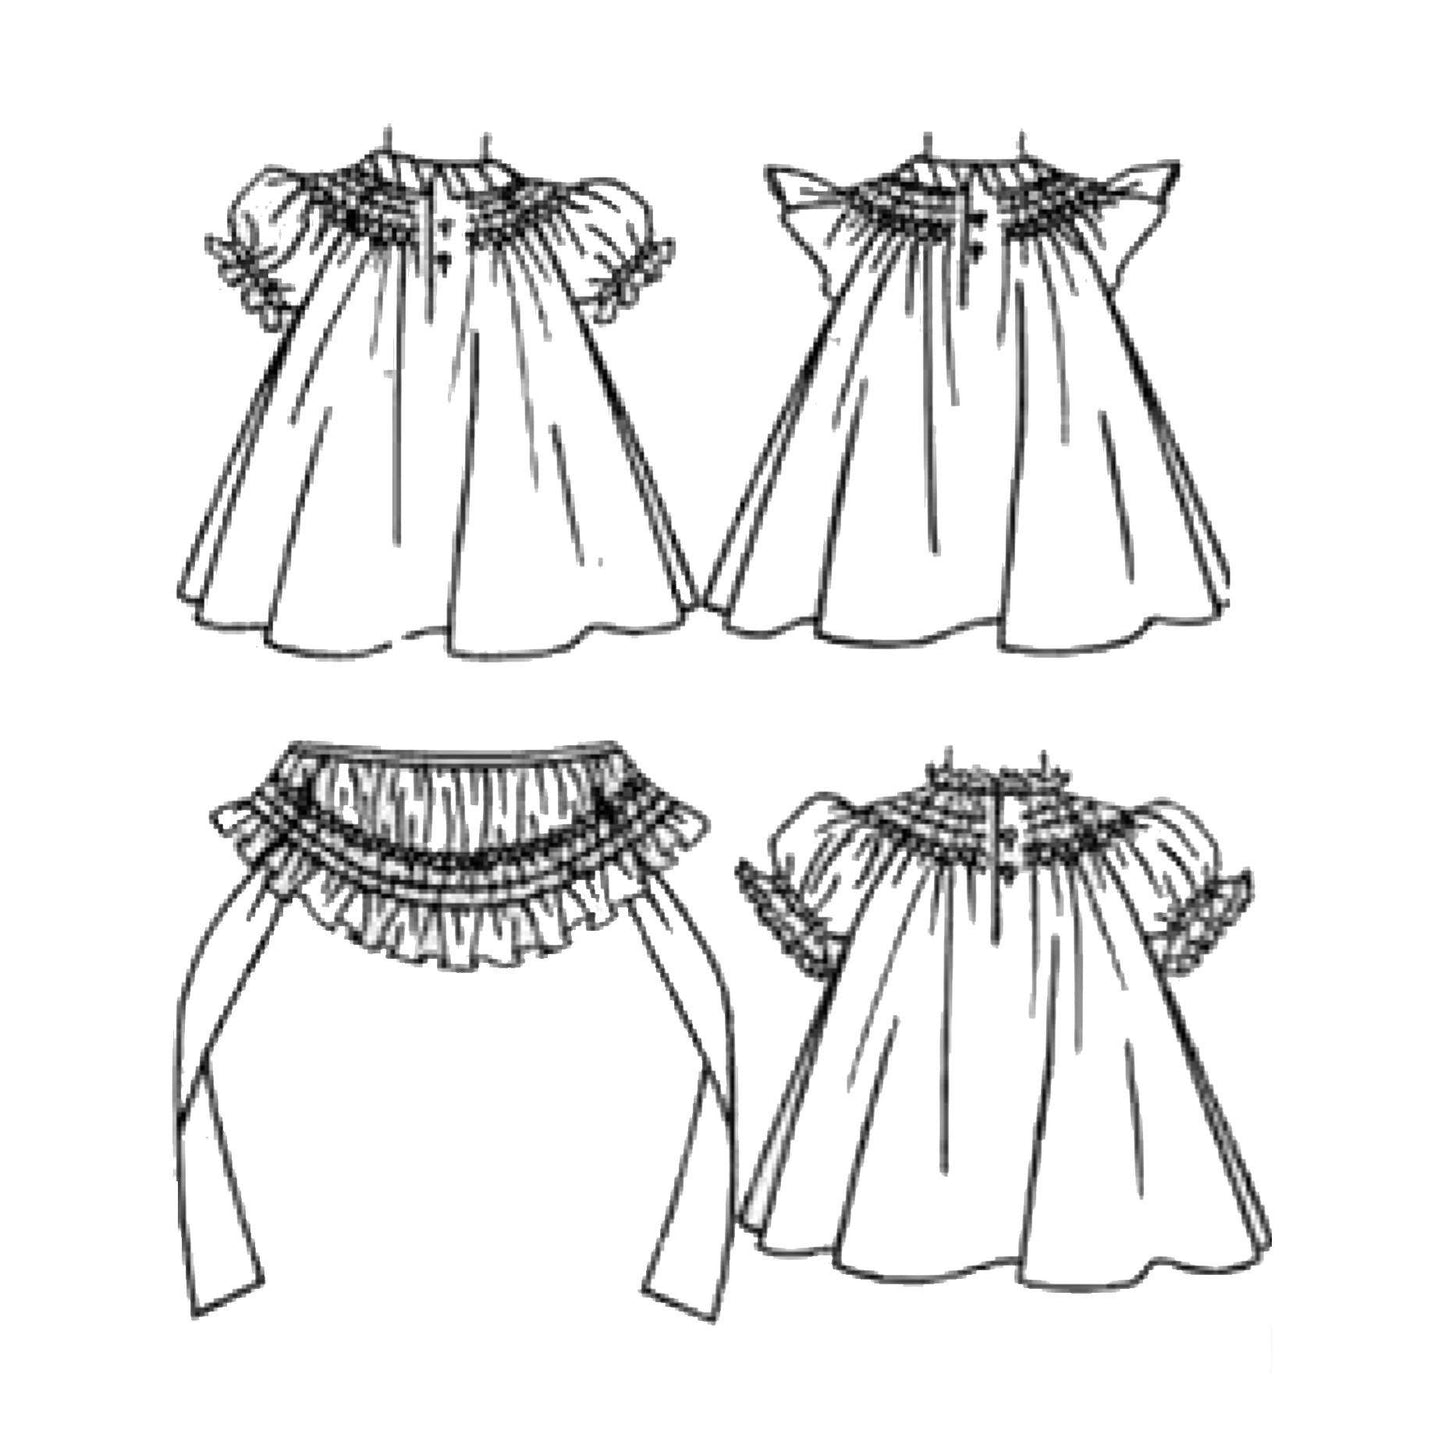 Line drawings of dress and bonnet.